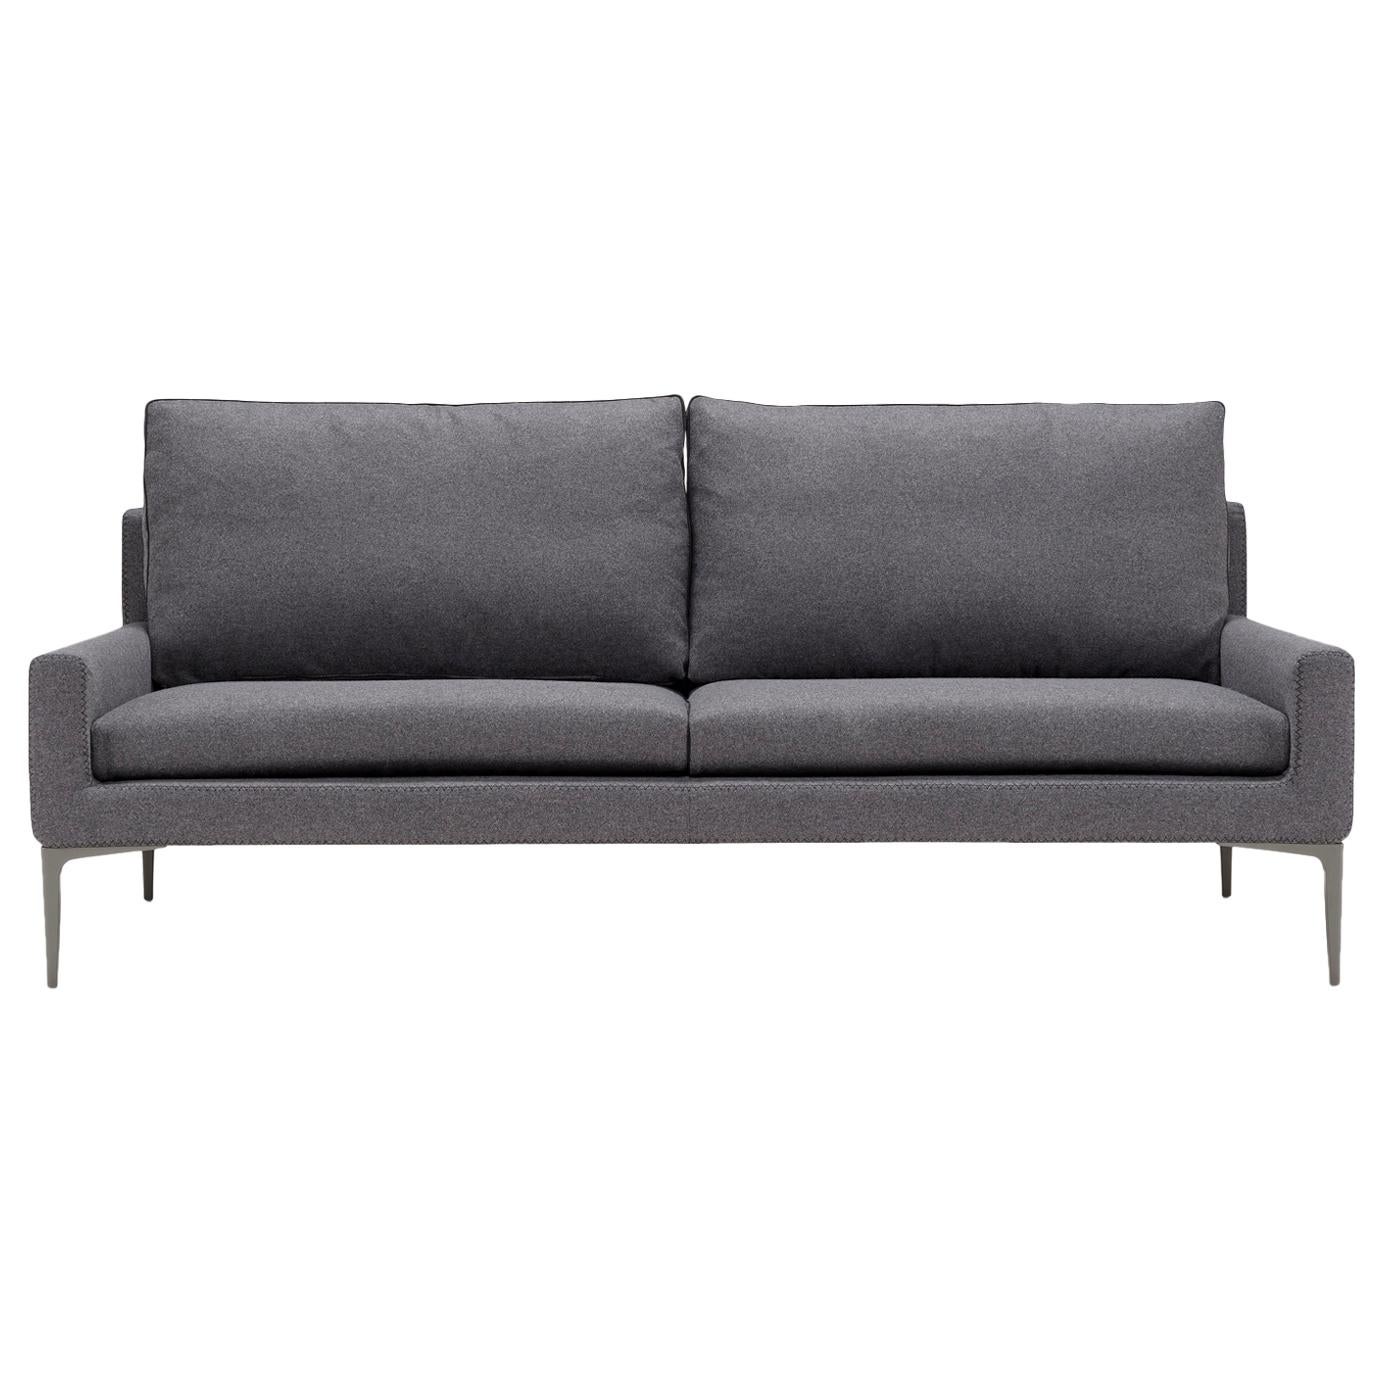 Amura 'Elsa' Two-Seat Sofa in Charcoal Gray Wool Gray by Luca Scacchetti